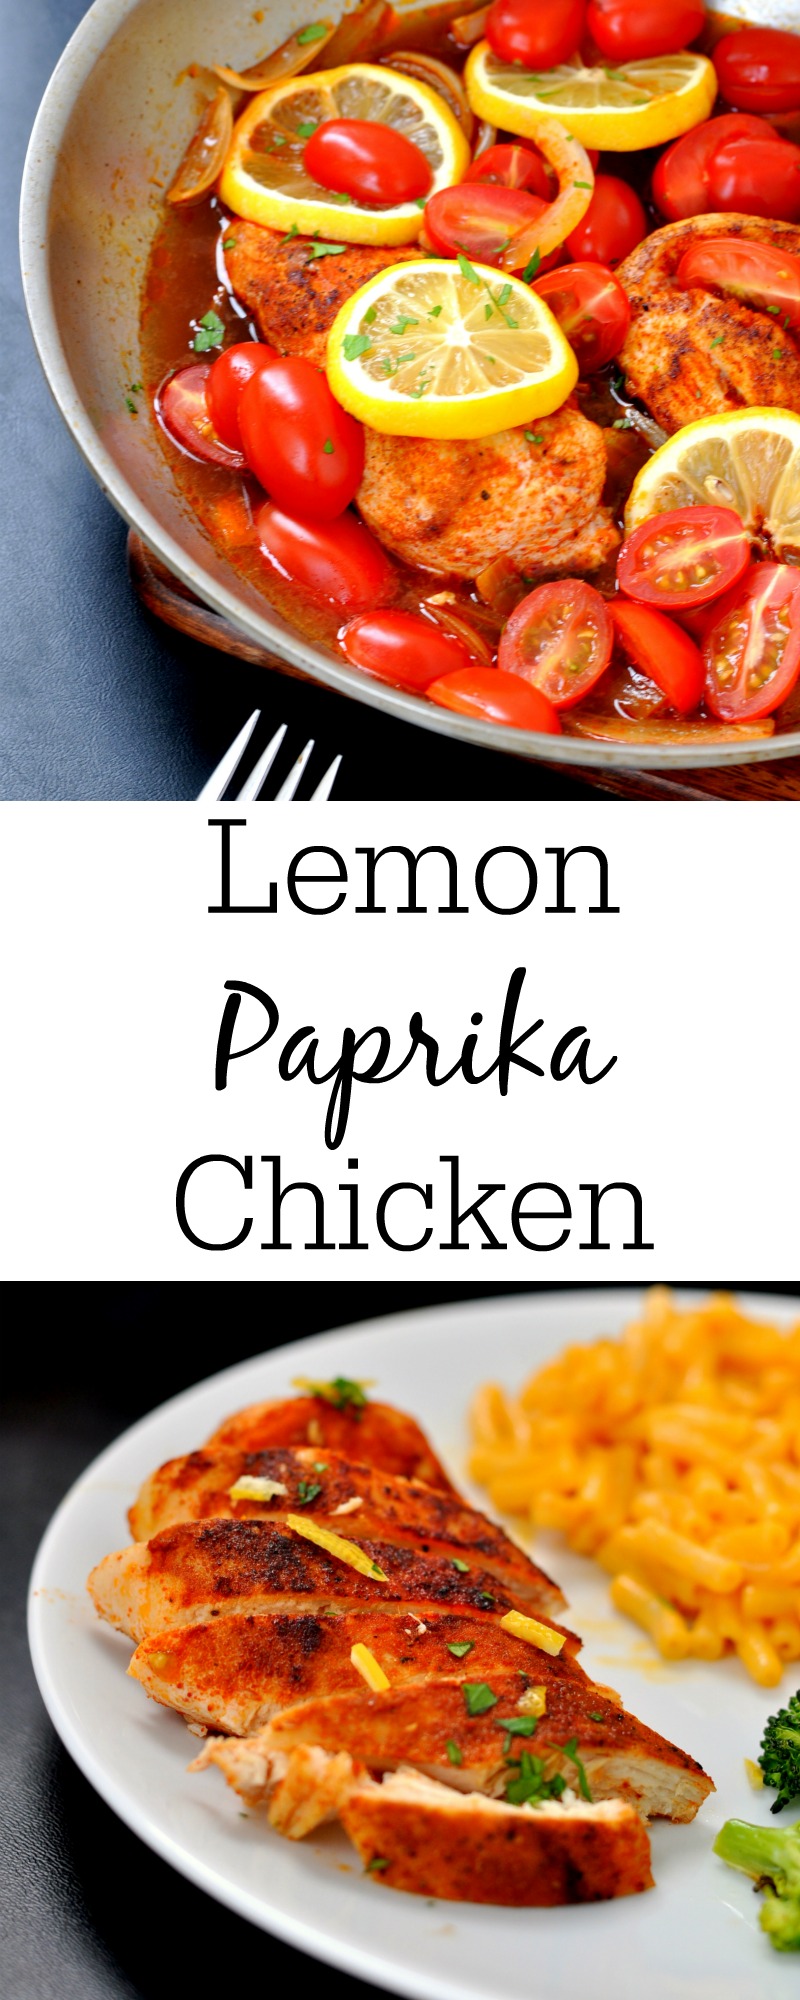 This lemon paprika chicken recipe is done in under 30 minutes. It makes the perfect weeknight meal!